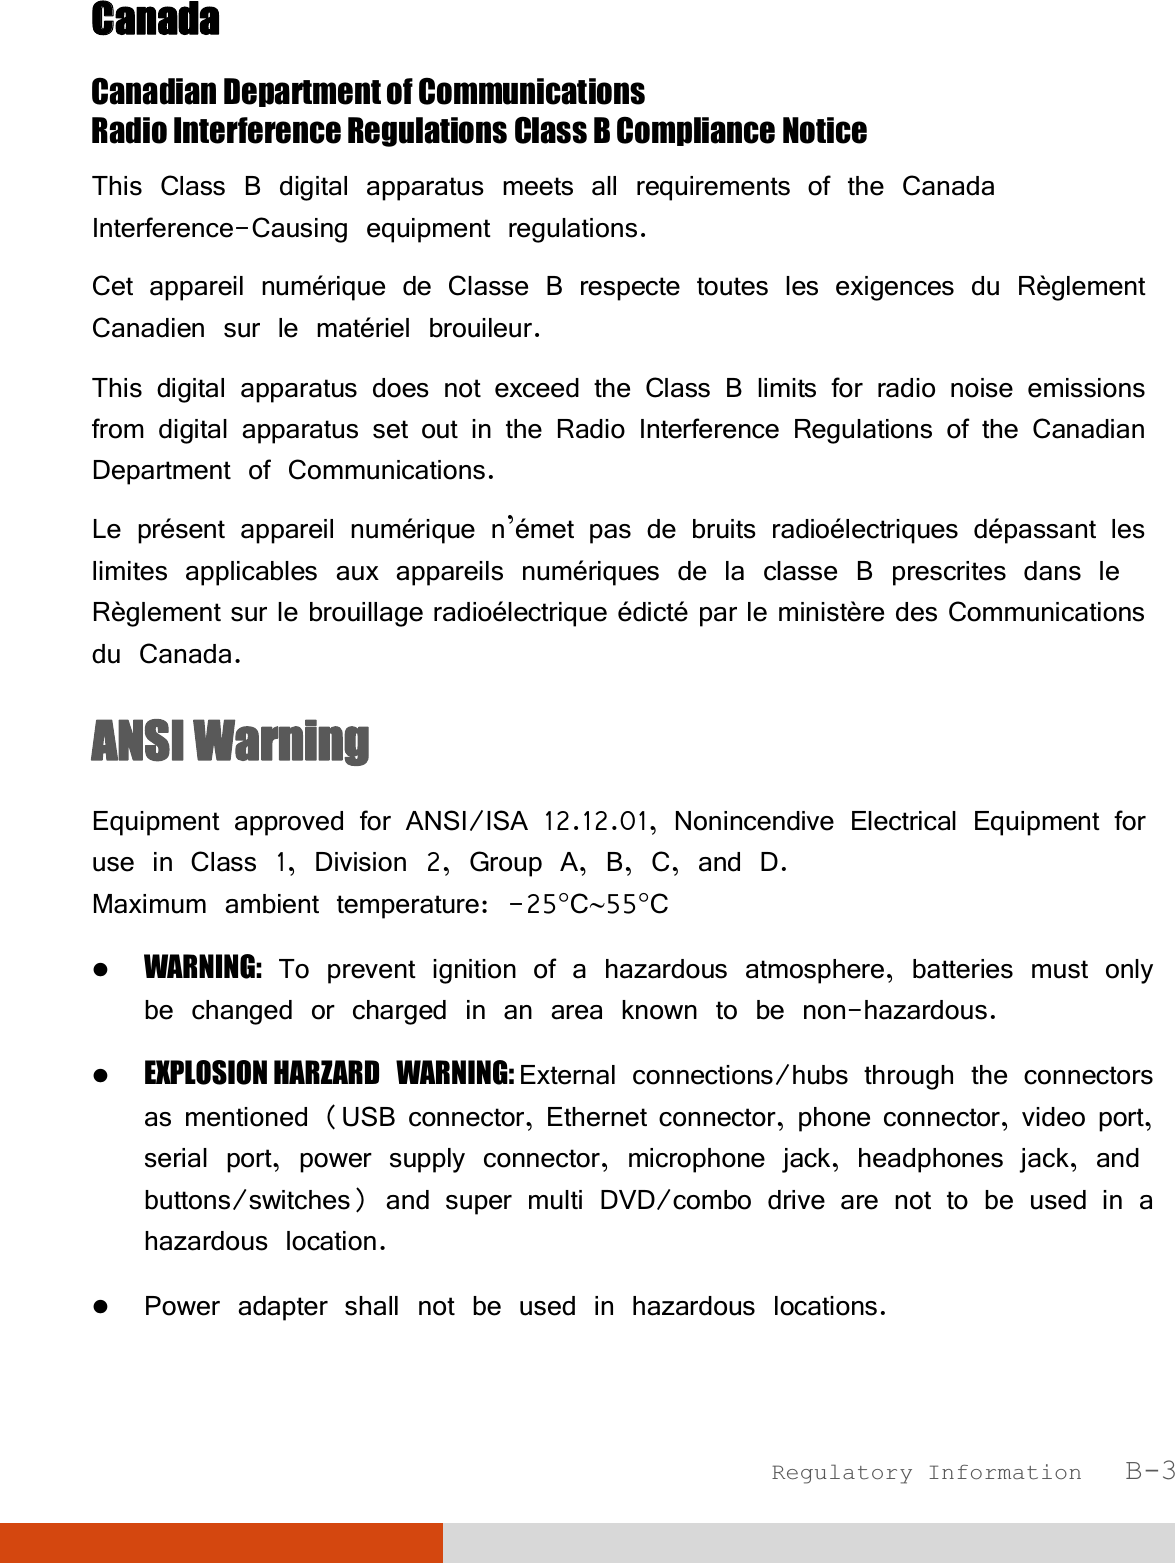  Regulatory Information   B-3 CCanada Canadian Department of Communications Radio Interference Regulations Class B Compliance Notice This Class B digital apparatus meets all requirements of the Canada Interference-Causing equipment regulations. Cet appareil numérique de Classe B respecte toutes les exigences du Règlement Canadien sur le matériel brouileur. This digital apparatus does not exceed the Class B limits for radio noise emissions from digital apparatus set out in the Radio Interference Regulations of the Canadian Department of Communications. Le présent appareil numérique n’émet pas de bruits radioélectriques dépassant les limites applicables aux appareils numériques de la classe B prescrites dans le Règlement sur le brouillage radioélectrique édicté par le ministère des Communications du Canada. ANSI Warning Equipment approved for ANSI/ISA 12.12.01, Nonincendive Electrical Equipment for use in Class 1, Division 2, Group A, B, C, and D. Maximum ambient temperature: -25°C∼55°C  WARNING: To prevent ignition of a hazardous atmosphere, batteries must only be changed or charged in an area known to be non-hazardous.  EXPLOSION HARZARD WARNING: External connections/hubs through the connectors as mentioned (USB connector, Ethernet connector, phone connector, video port, serial port, power supply connector, microphone jack, headphones jack, and buttons/switches) and super multi DVD/combo drive are not to be used in a hazardous location.  Power adapter shall not be used in hazardous locations. 